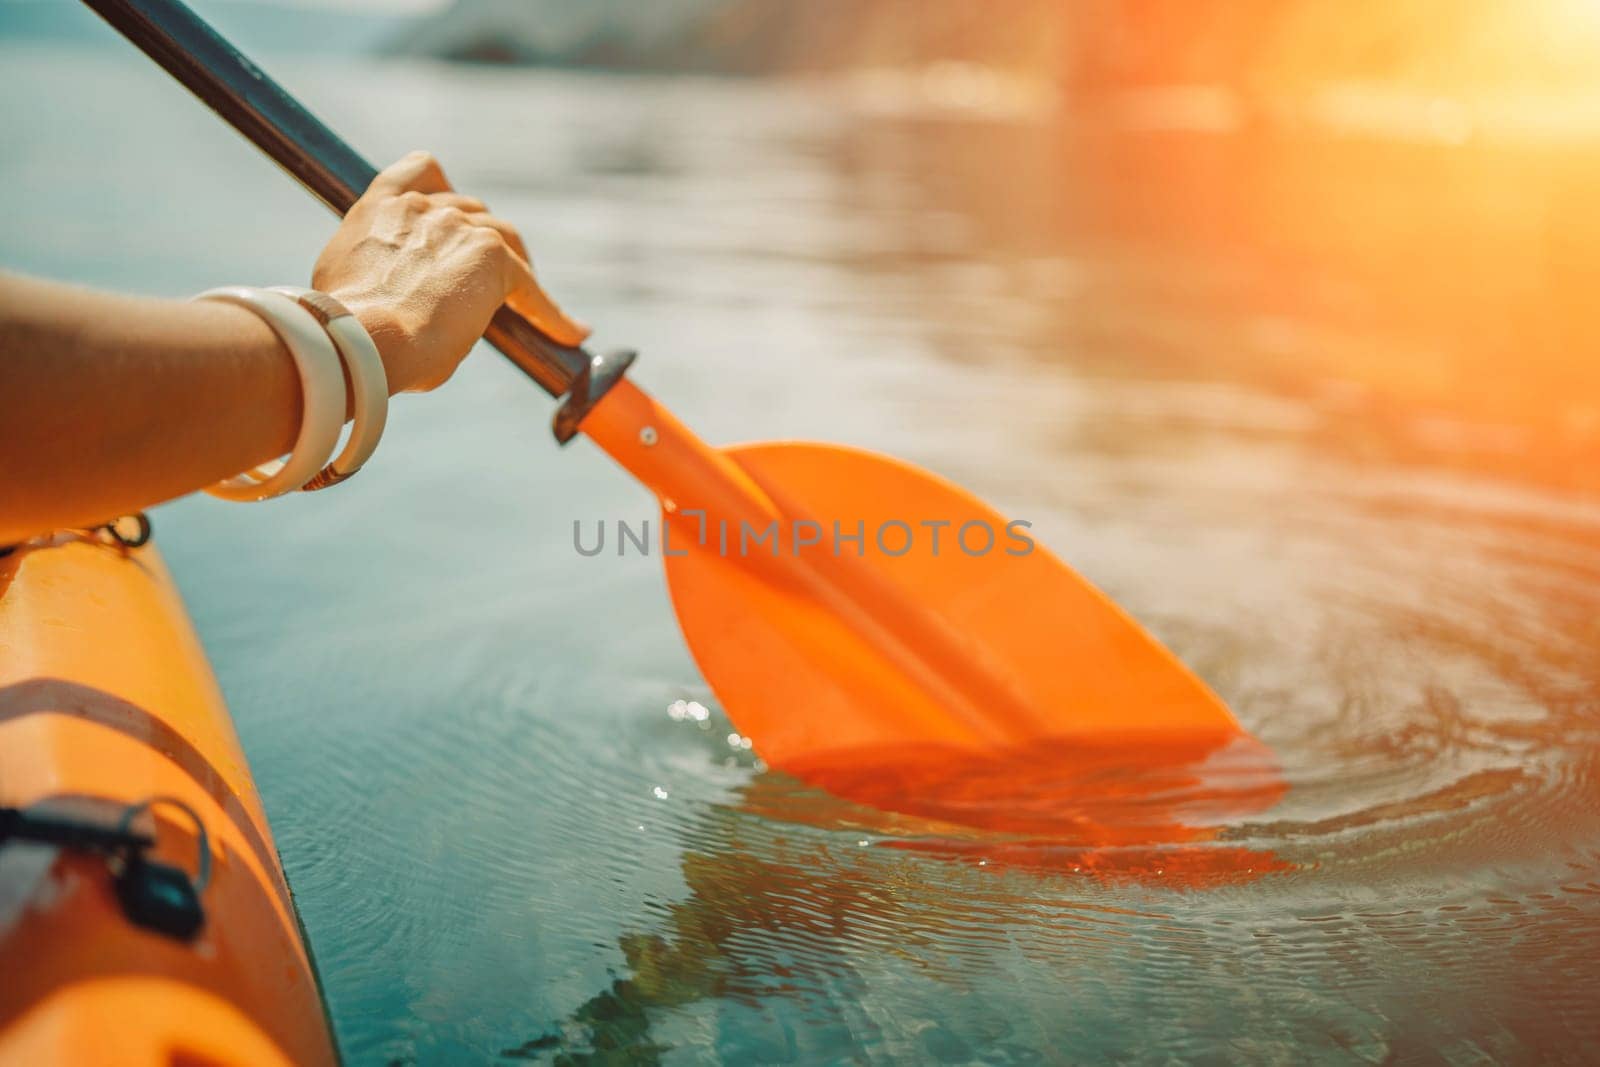 Kayak paddle sea vacation. Person paddles with orange paddle oar on kayak in sea. Leisure active lifestyle recreation activity rest tourism travel.